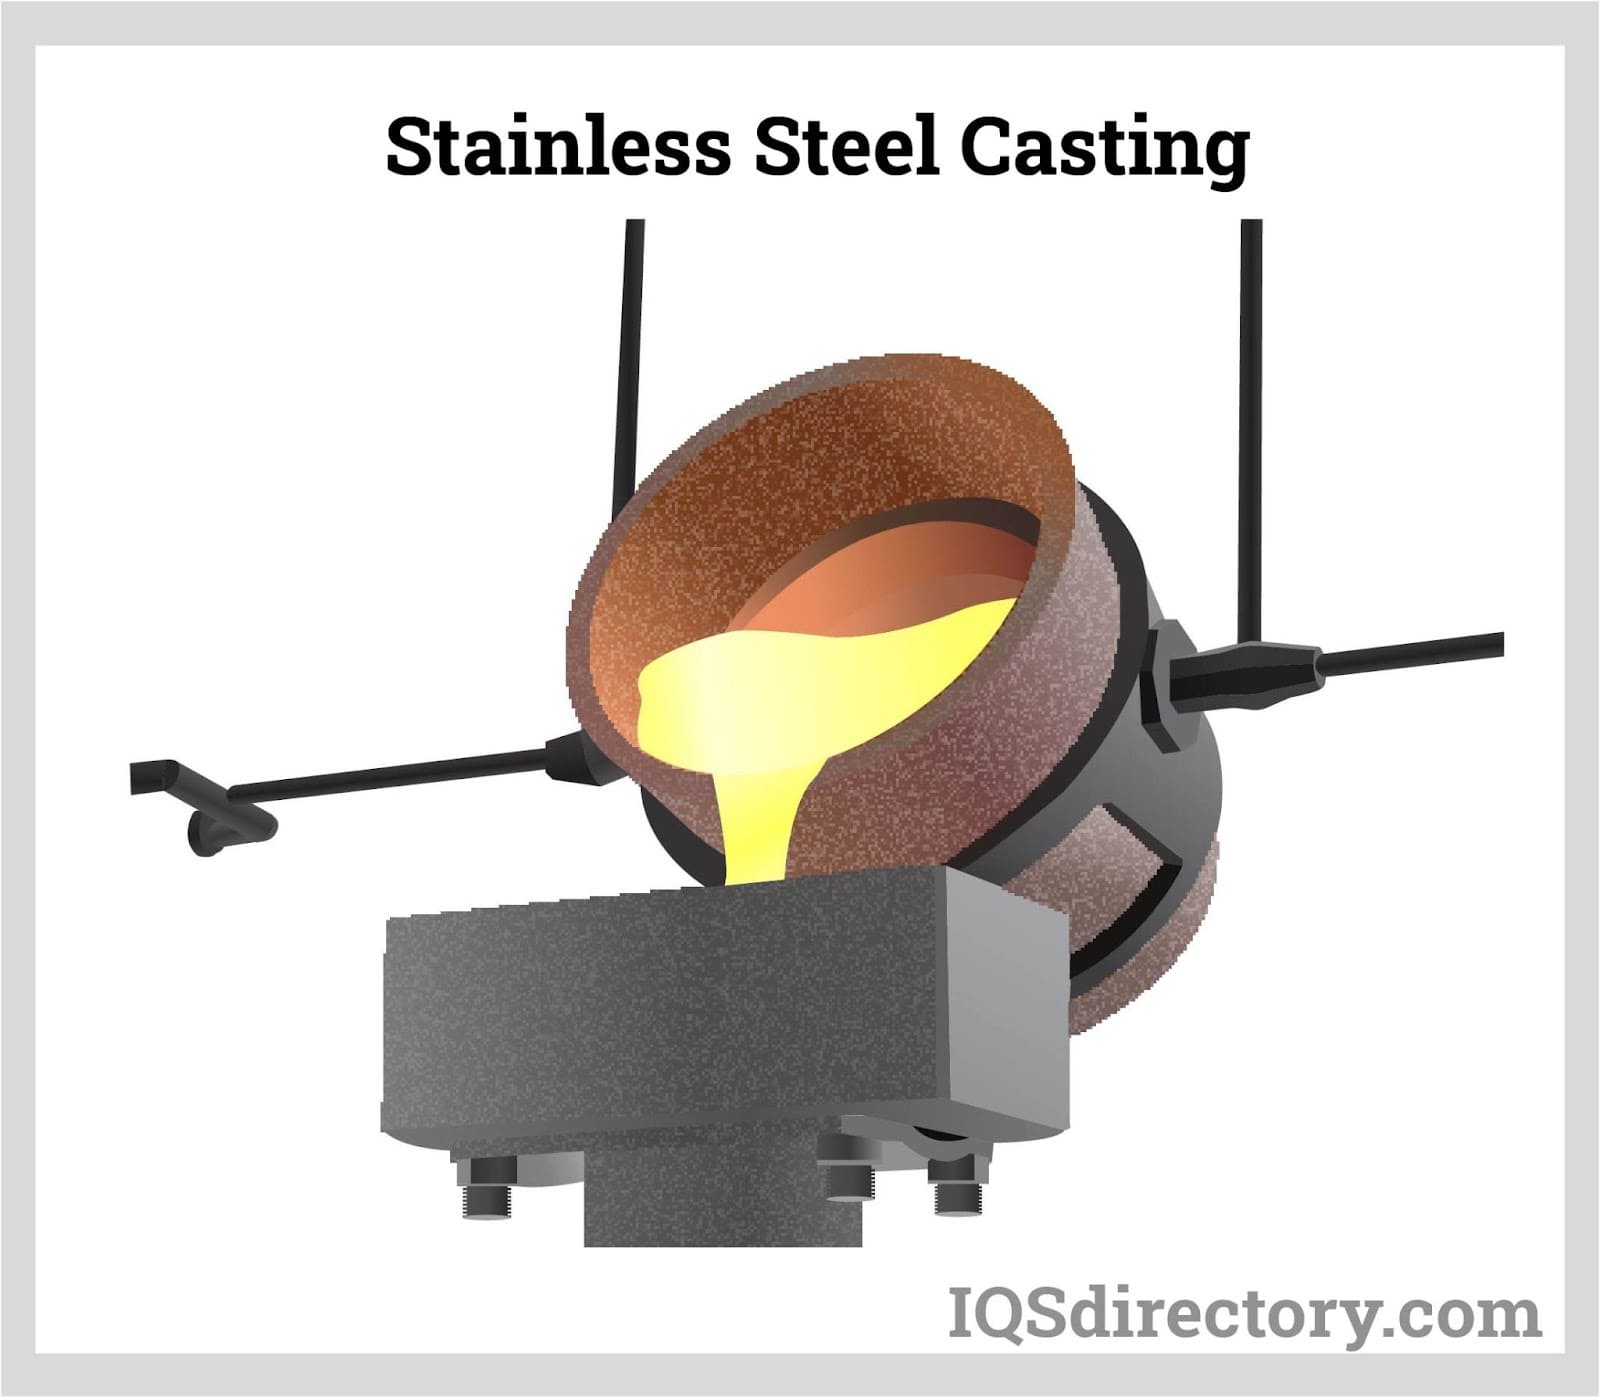 Cold Rolling Stainless Steel